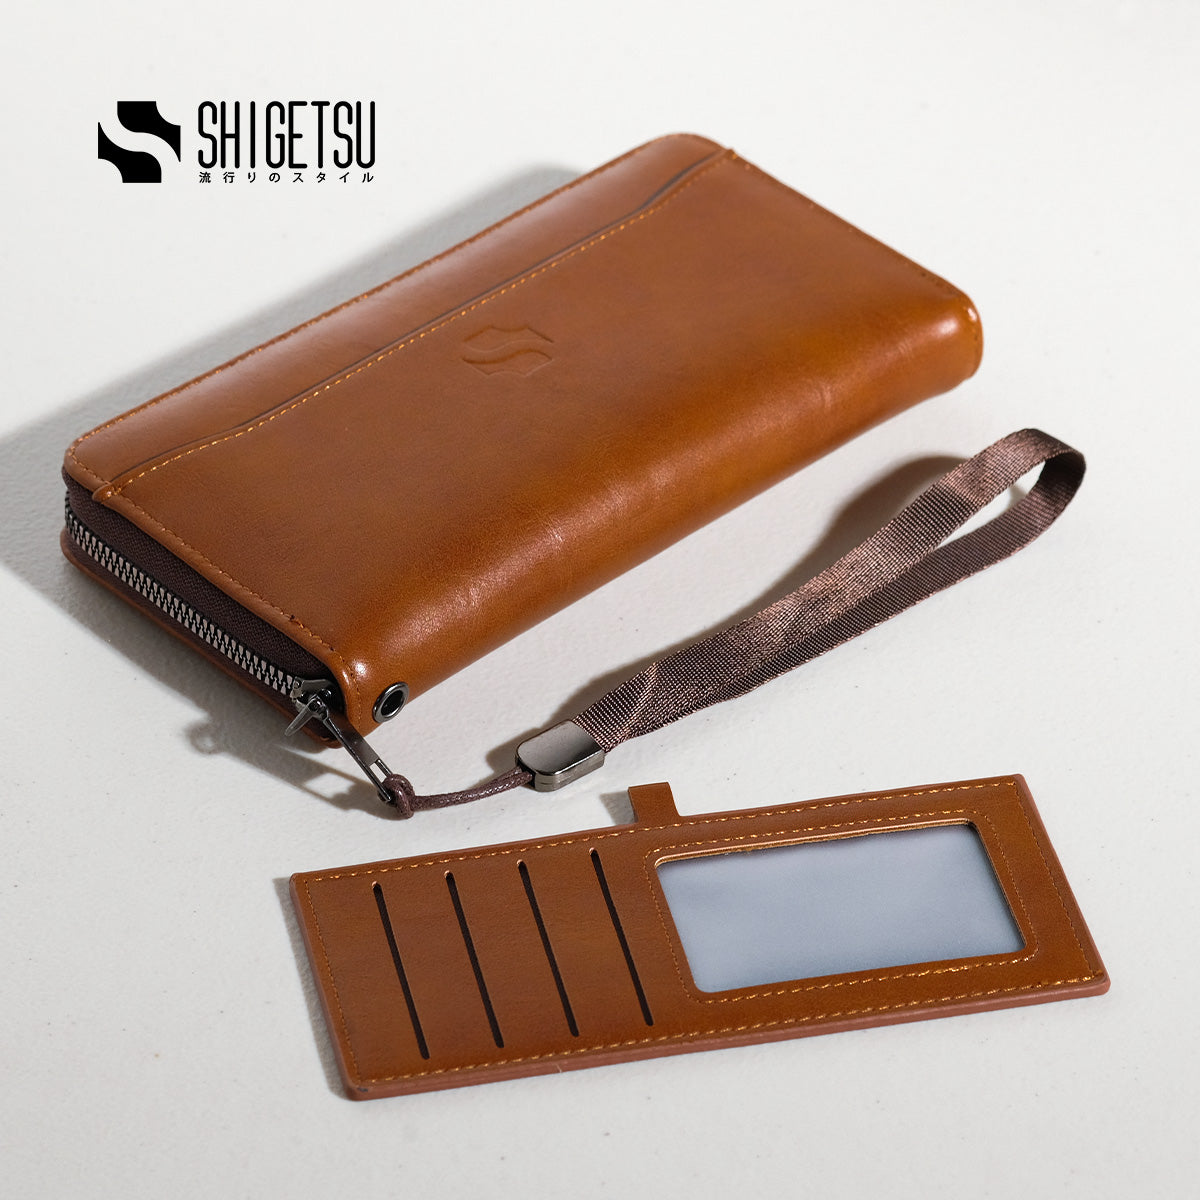 Shigetsu Ome Leather Wallet For Men Long Wallet Card Holder Card Wallet For Men Coin Purse